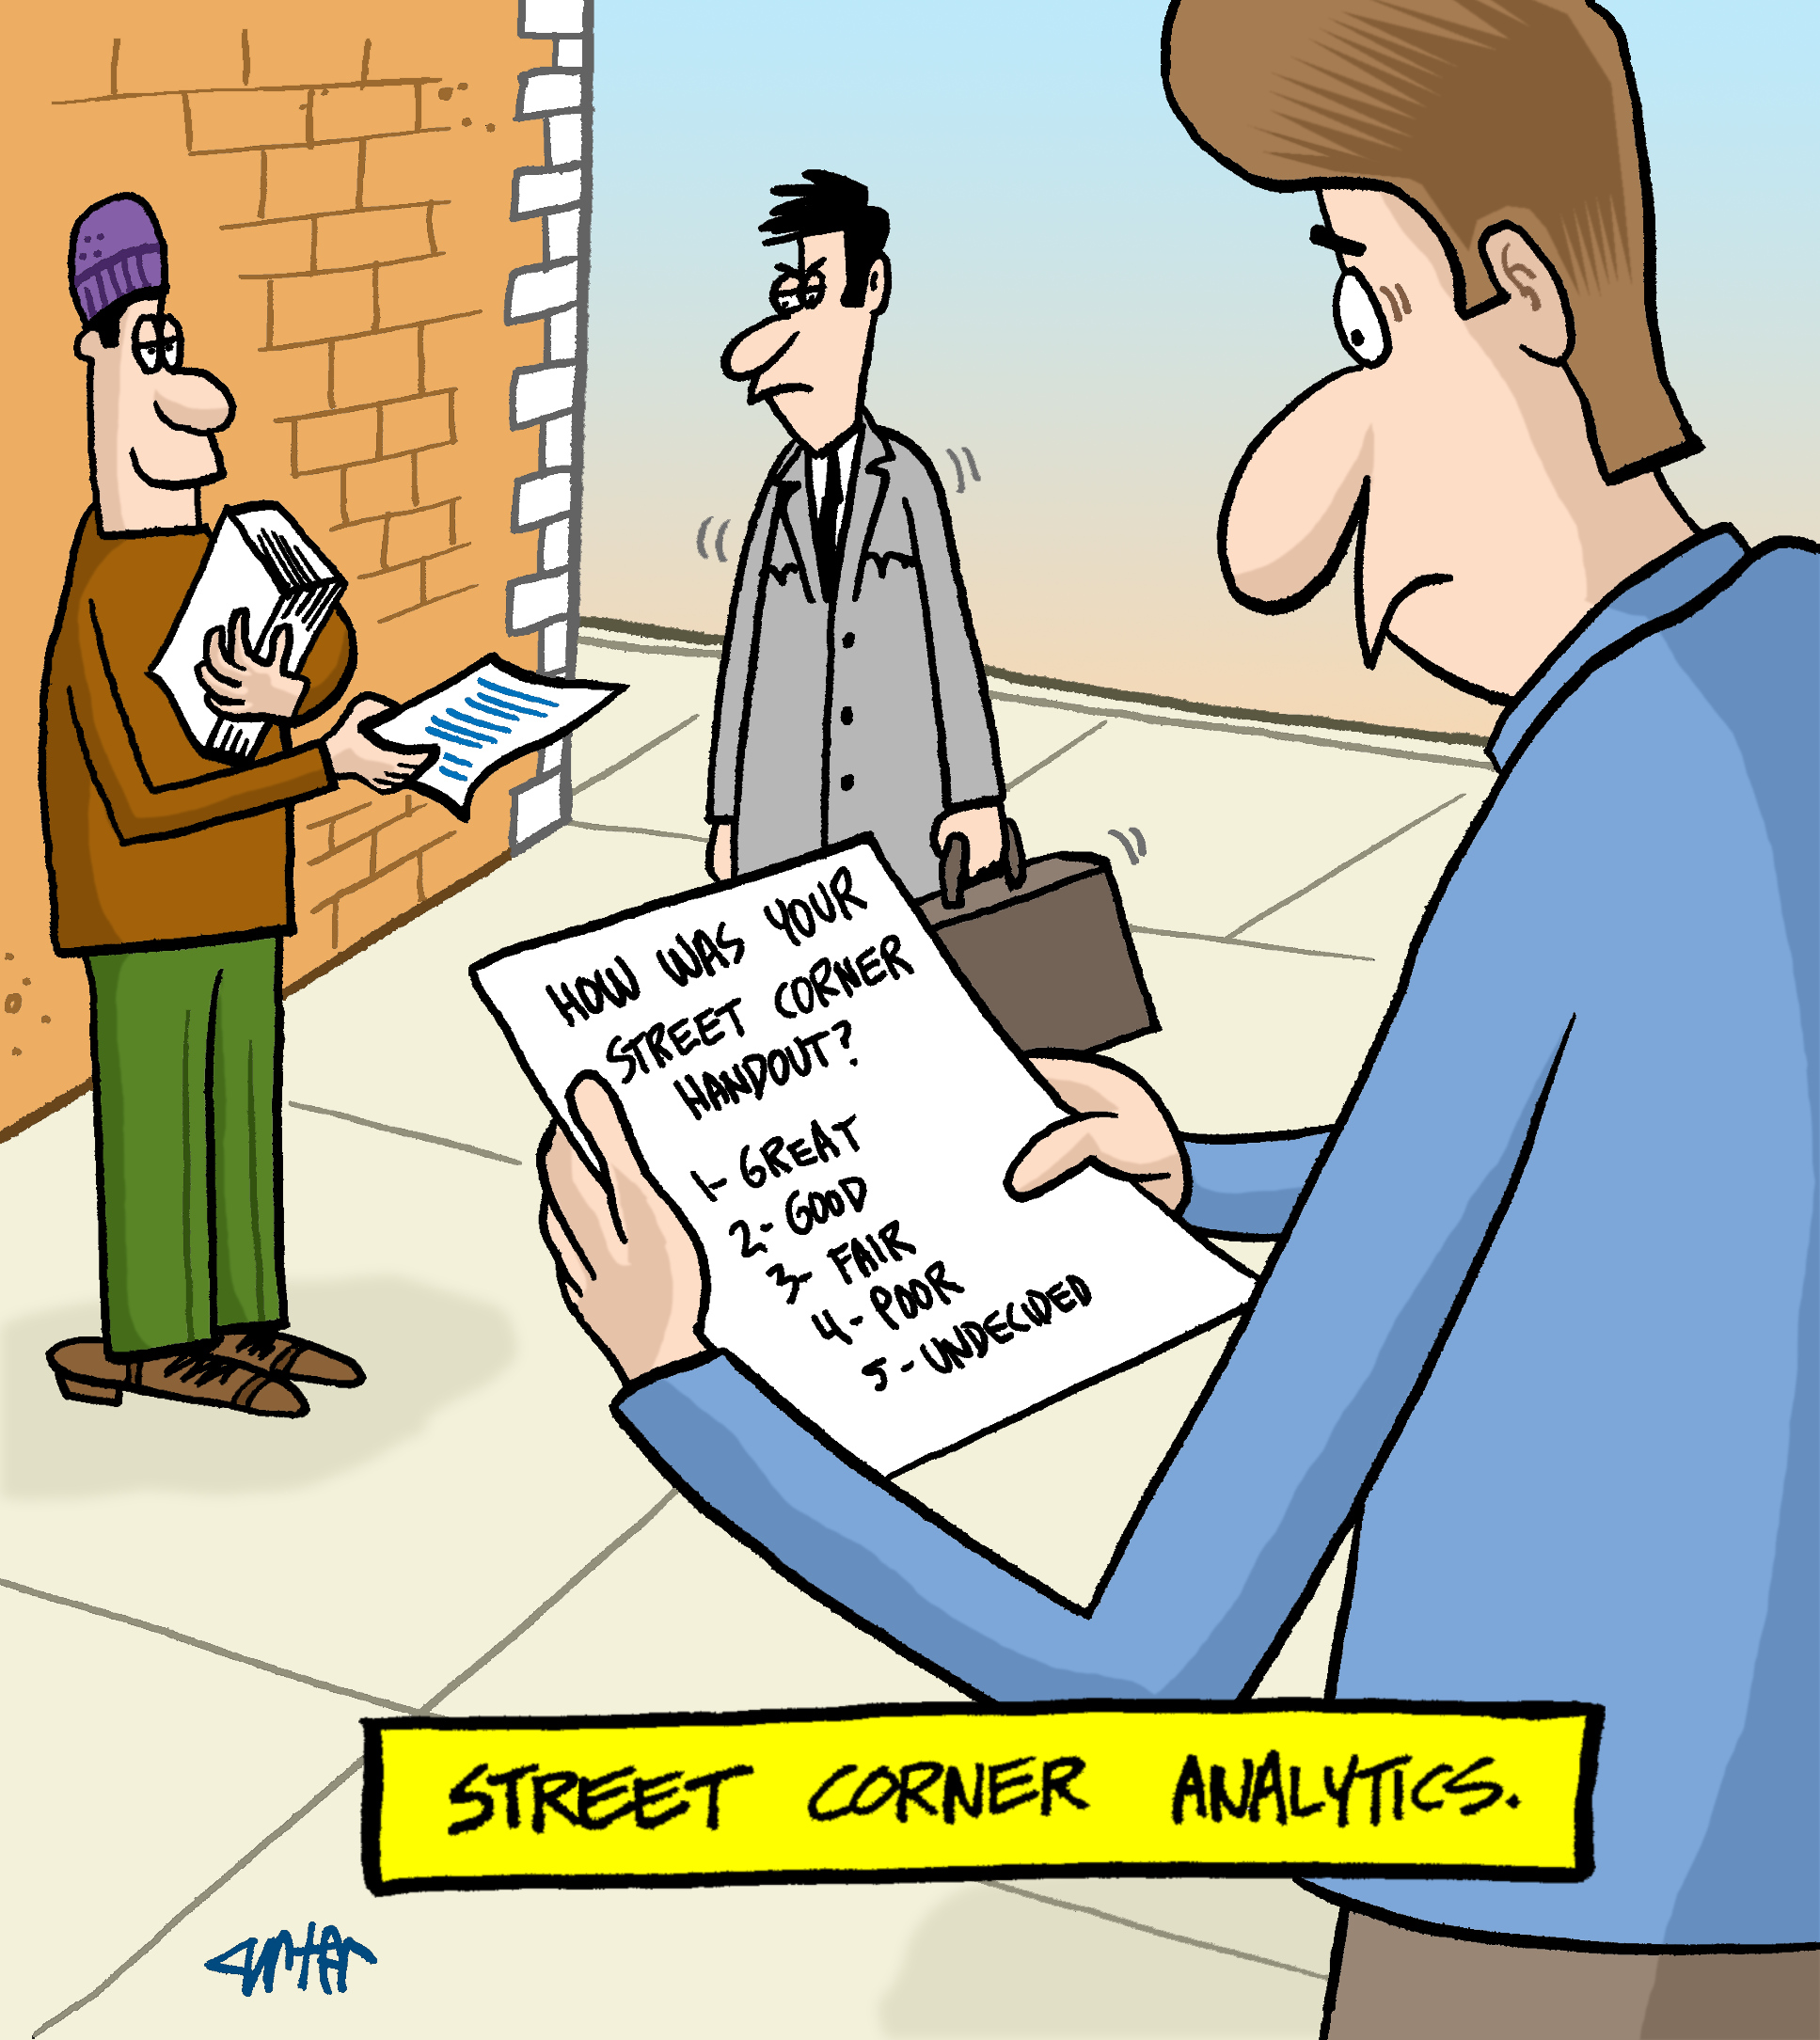 A cartoon showing a man on a street corner handing out a leaflet.  But the leaflet is just a survey about the experience of receiving a leaflet